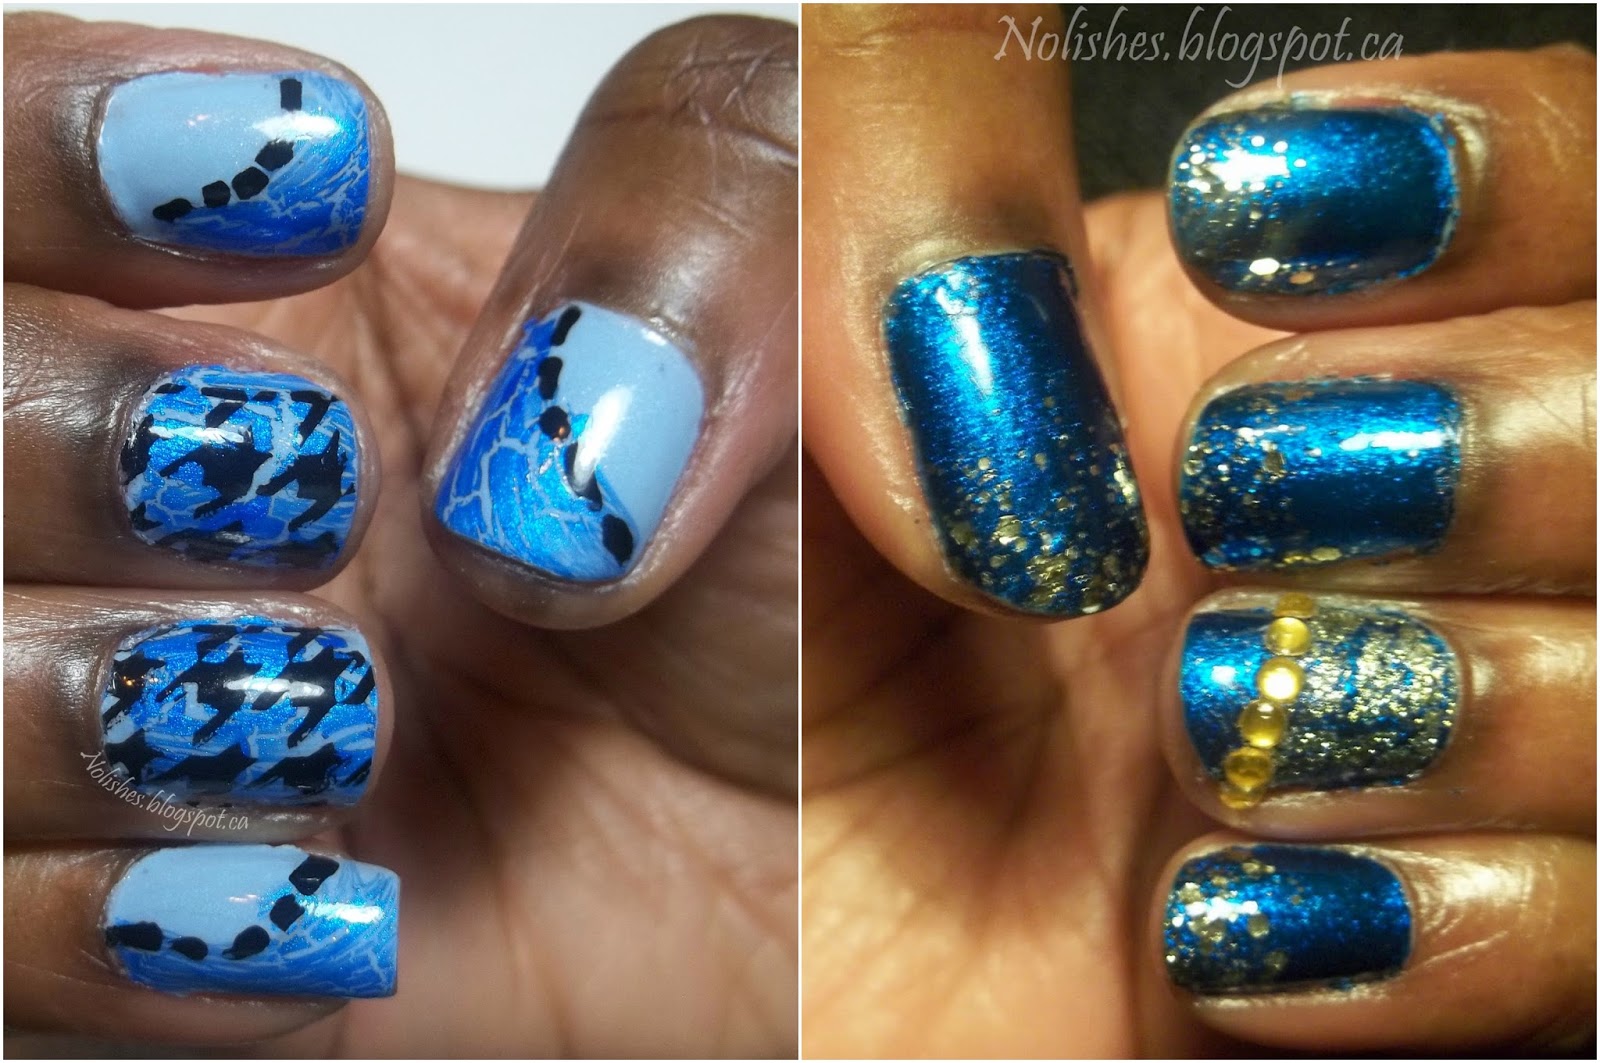 Blue Hounds-tooth Crackle Manicure, and the Blingy Turquoise and Gold Mani